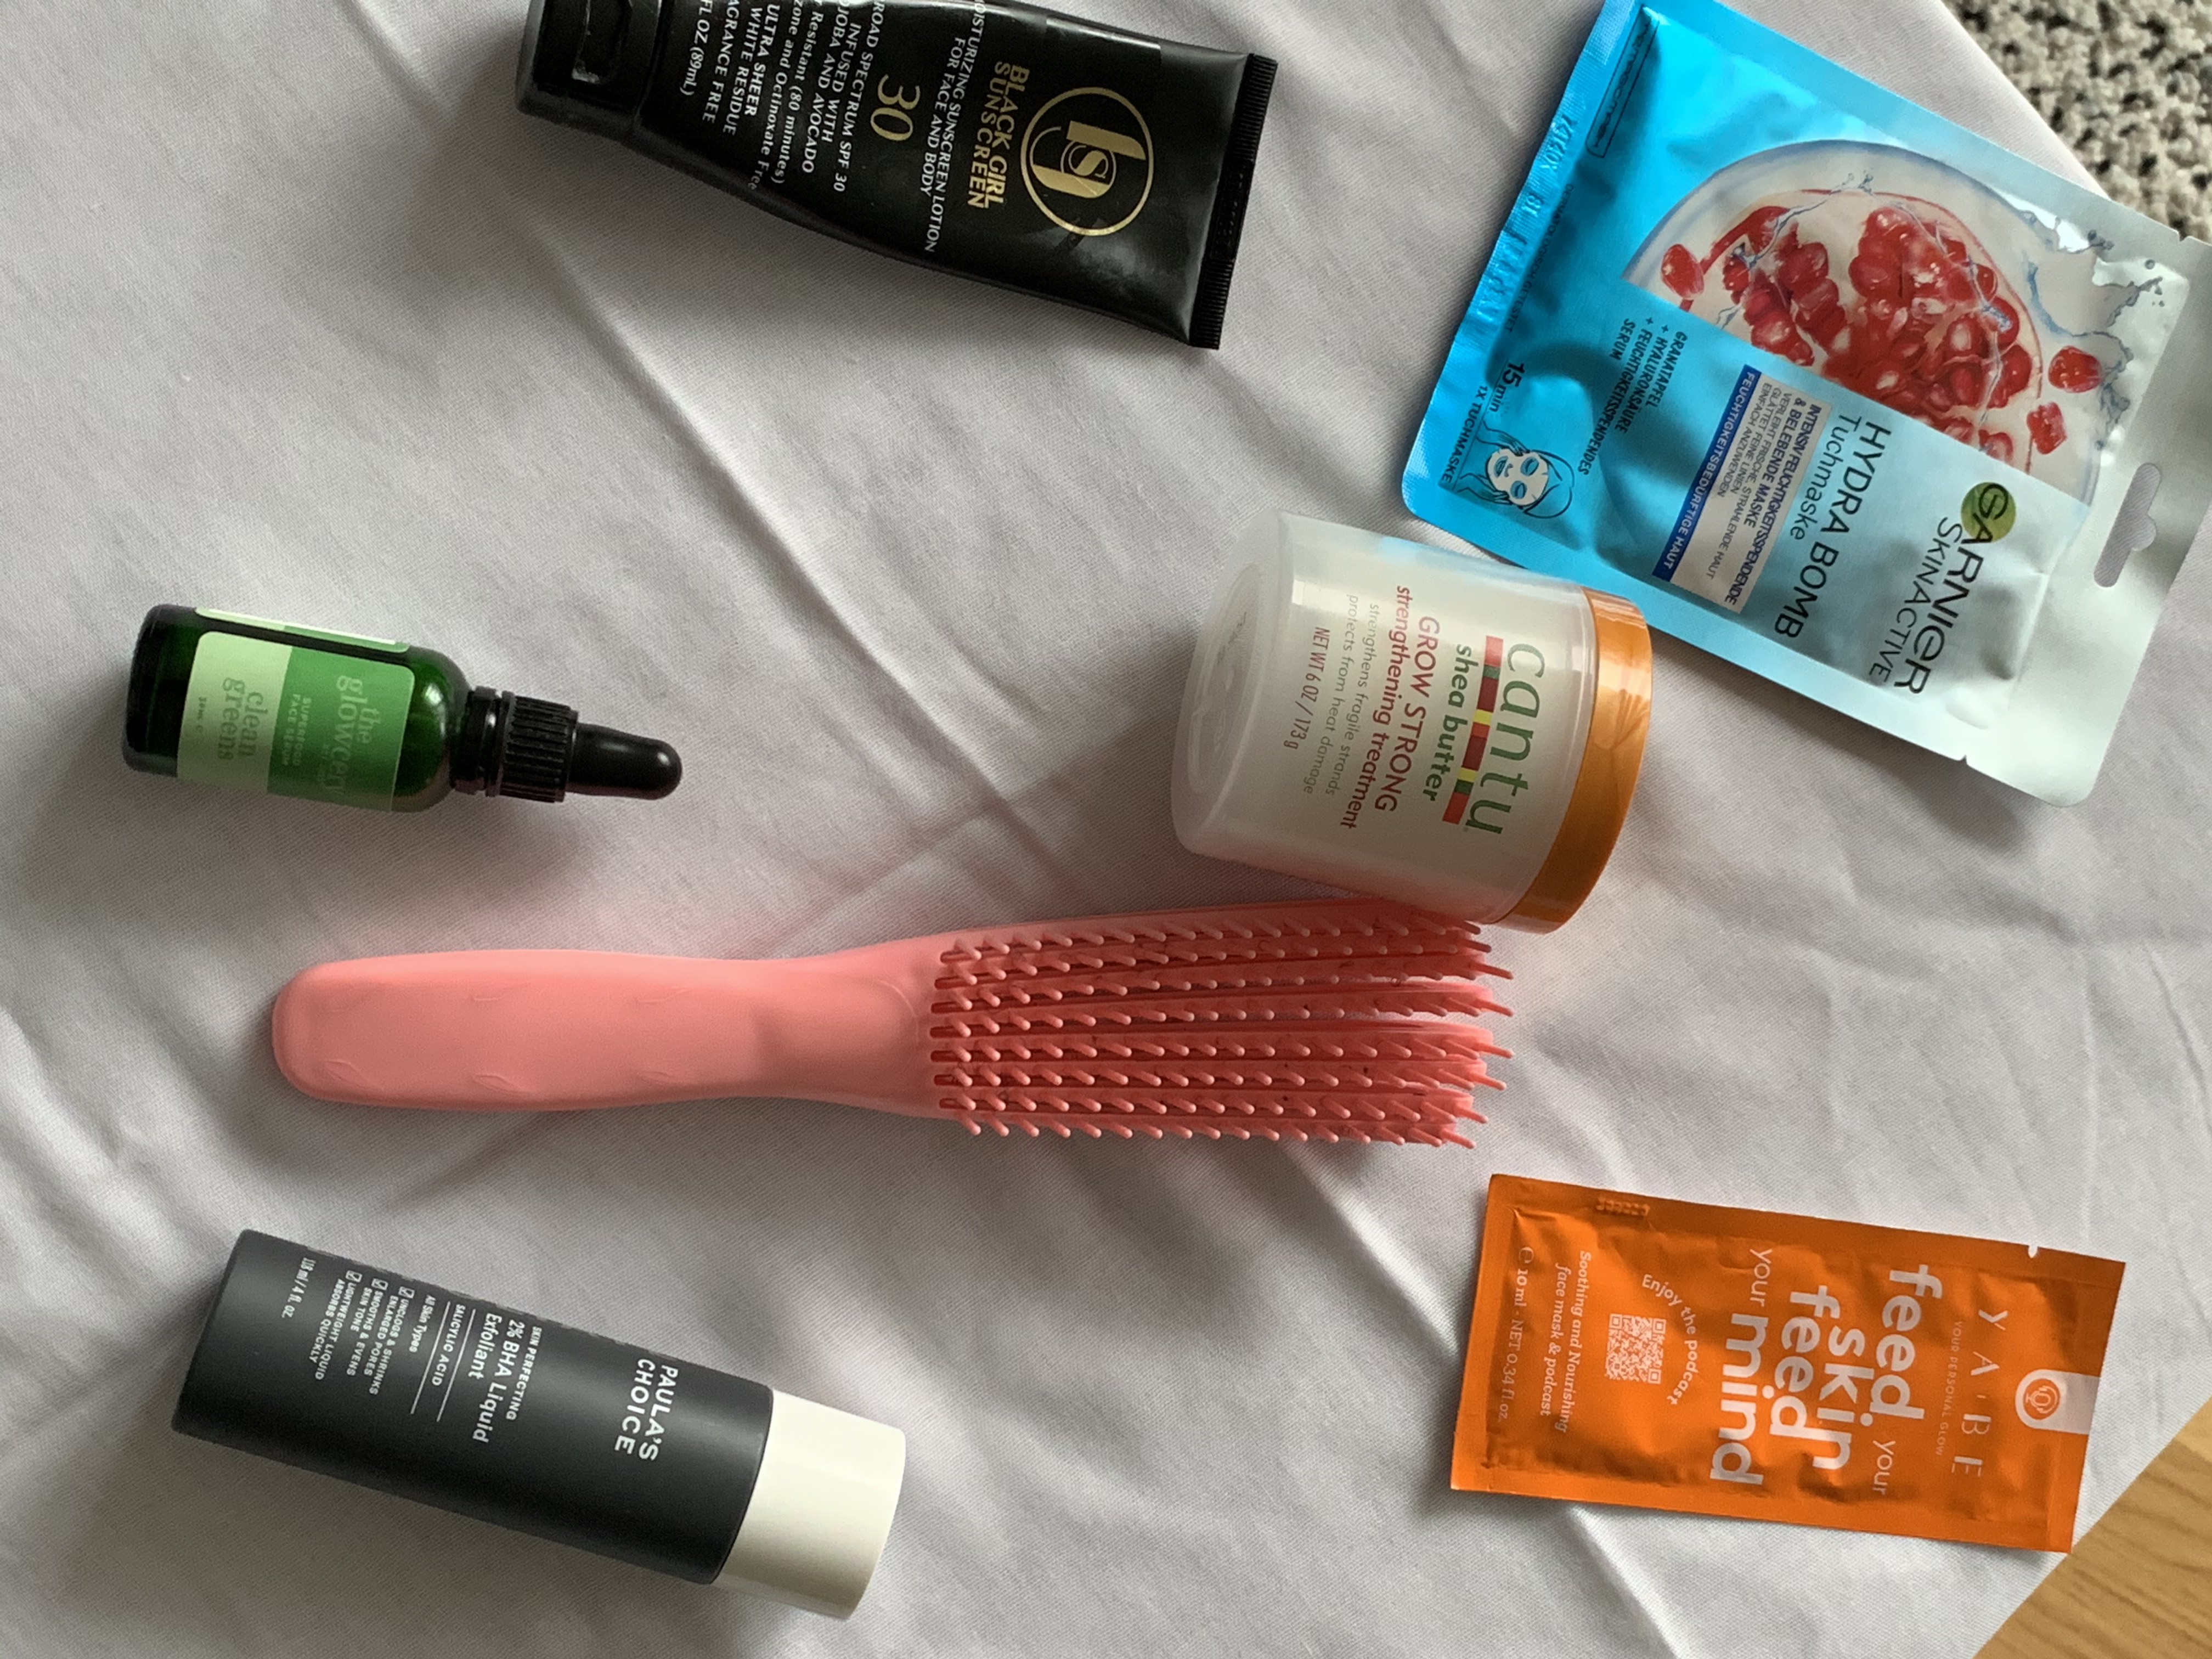 hair and skin products that I use